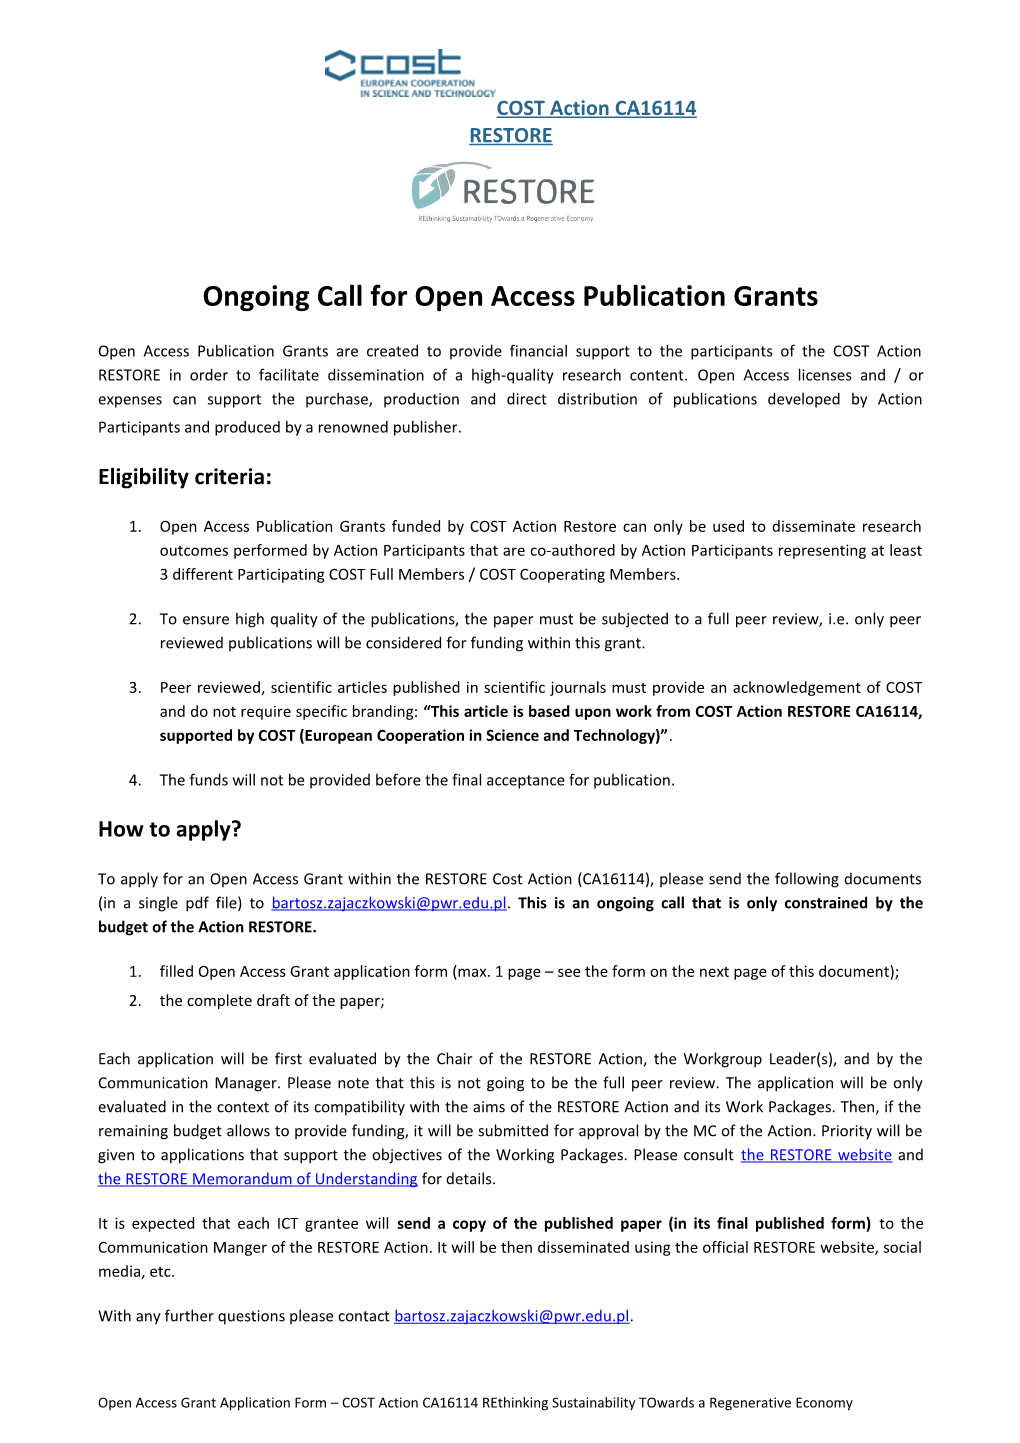 Ongoing Call Foropen Accesspublication Grants